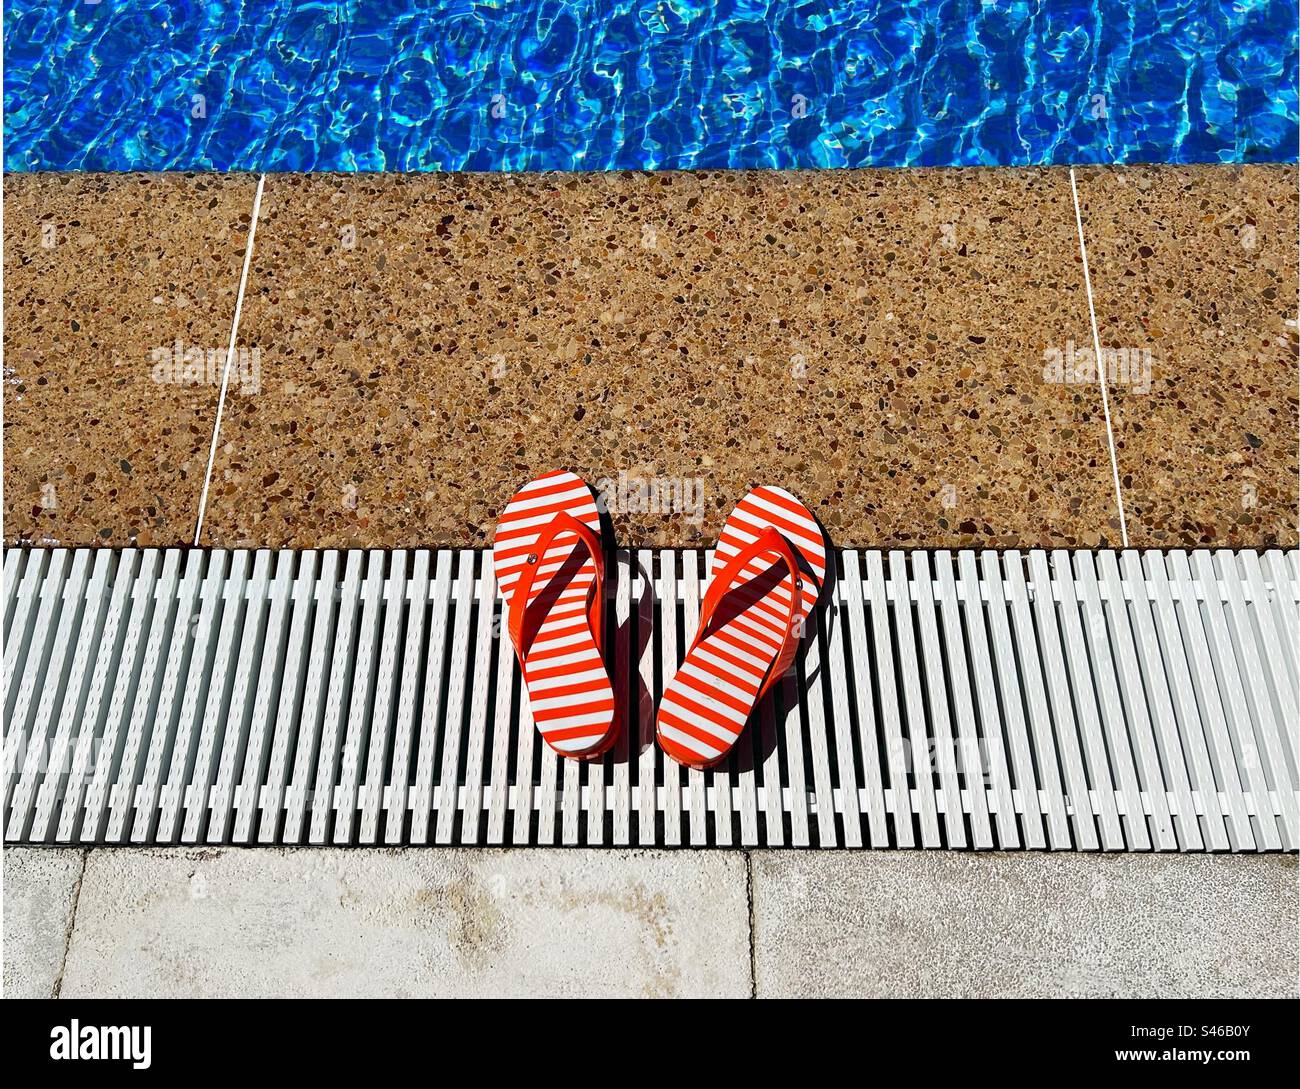 Red and white striped flip flops by the edge of a swimming pool Stock ...